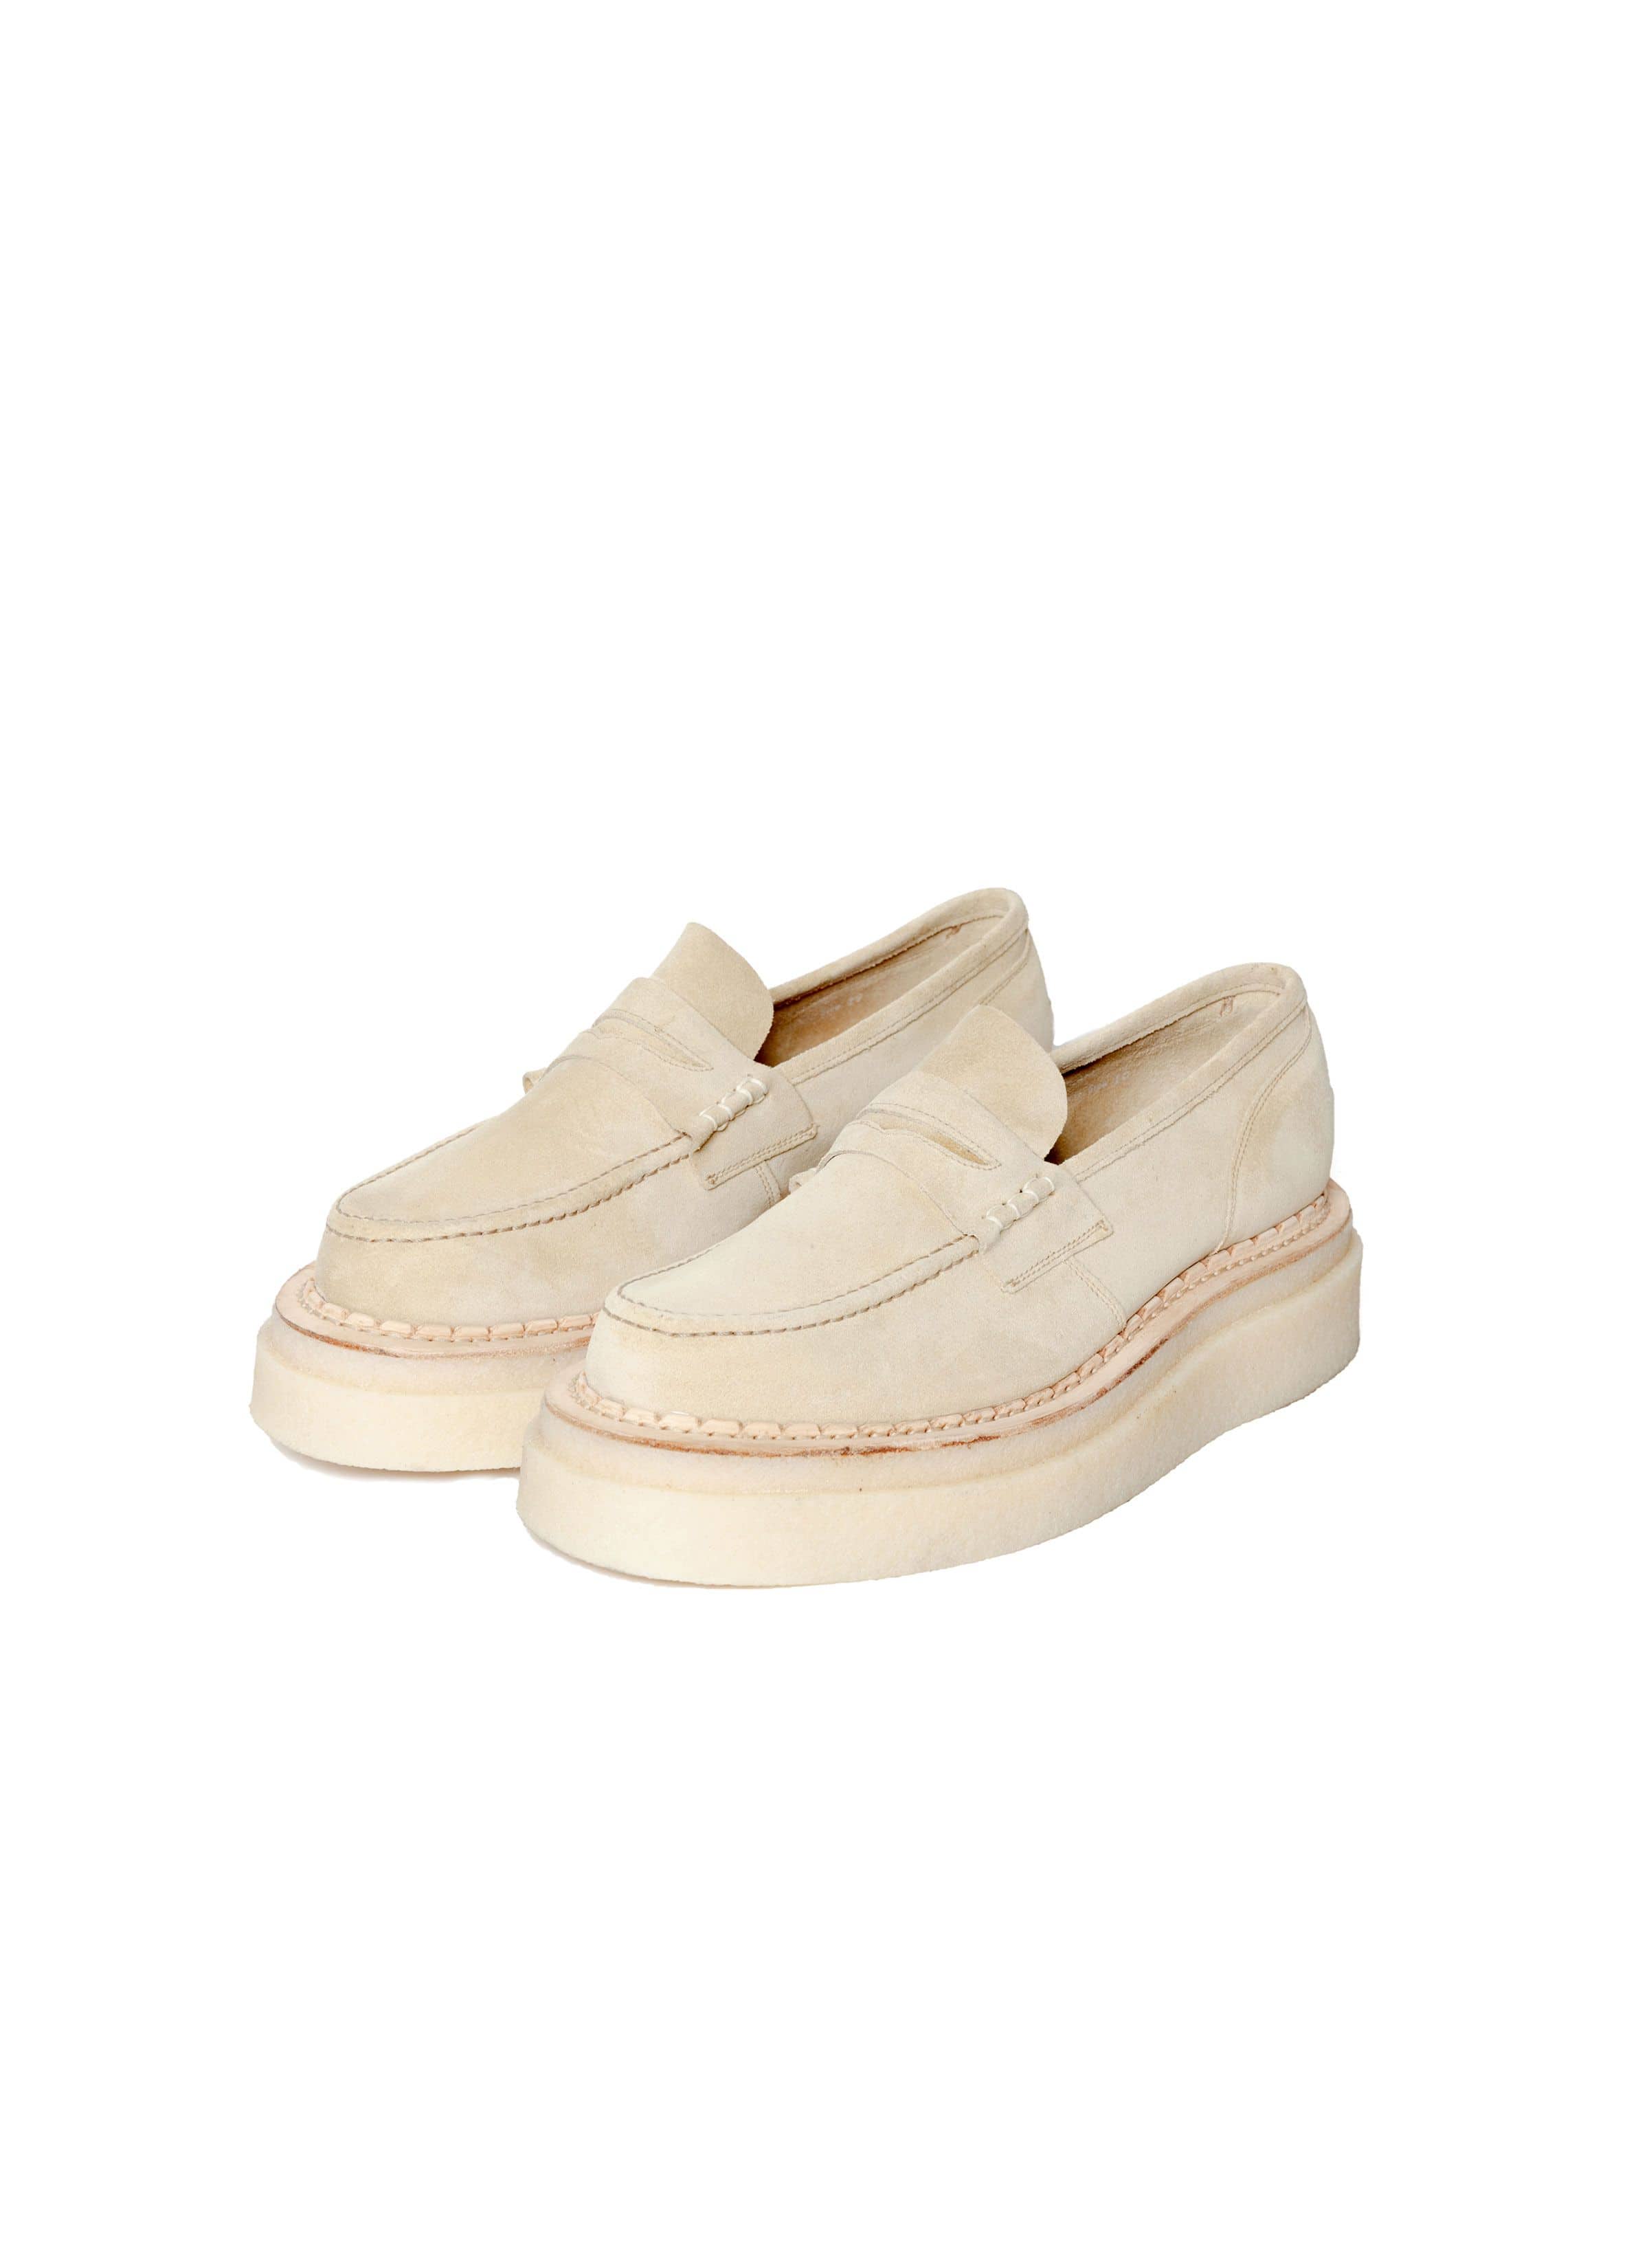 sacai x George Cox / Double Sole Coin Loafer 詳細画像 BEIGE 2